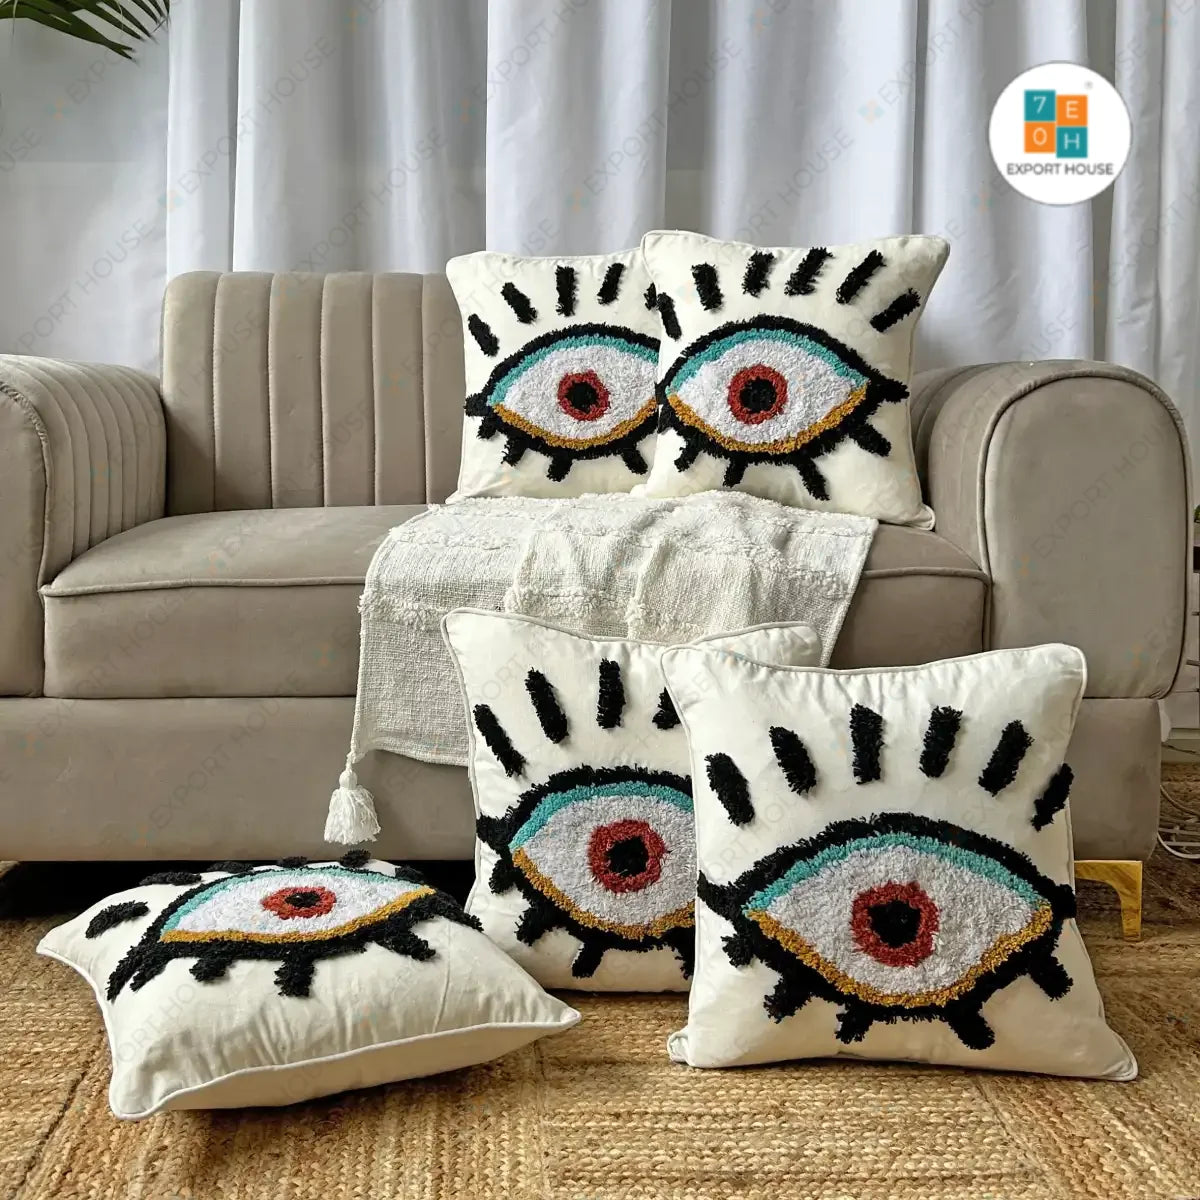 Enhance Your Space with 16x16 Inch Evil Eye Cotton Tufted Cushion Covers